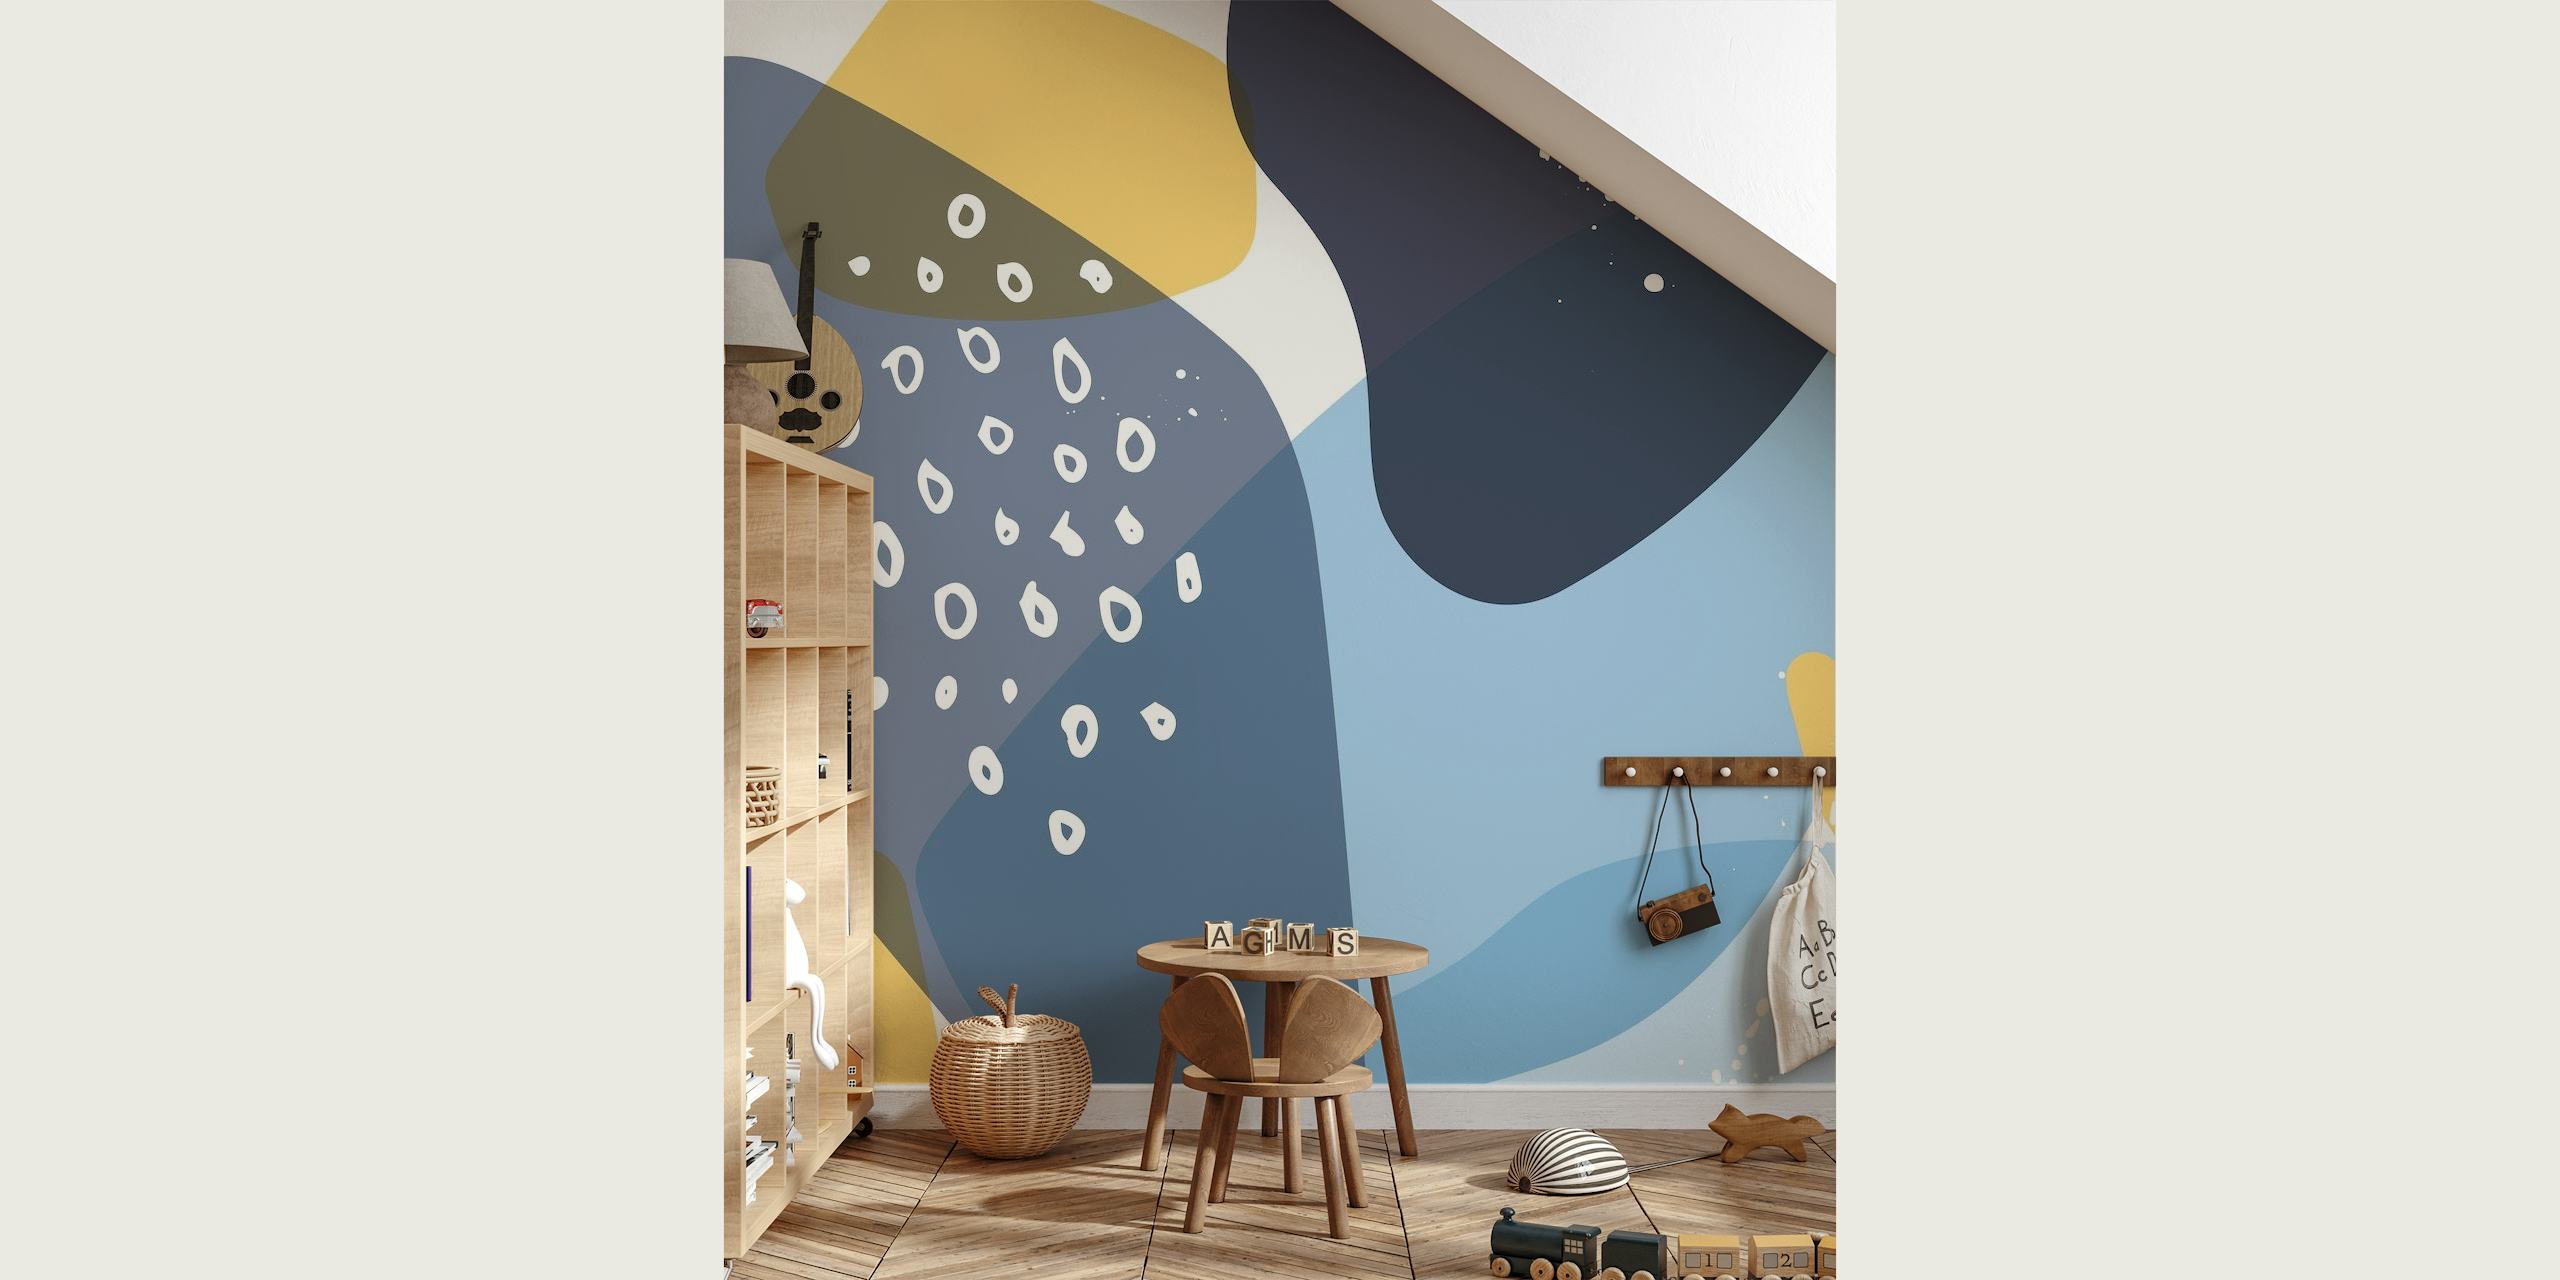 Fun Playroom Wallpapers for Kids - Bright Yellow, Blue, and White Design